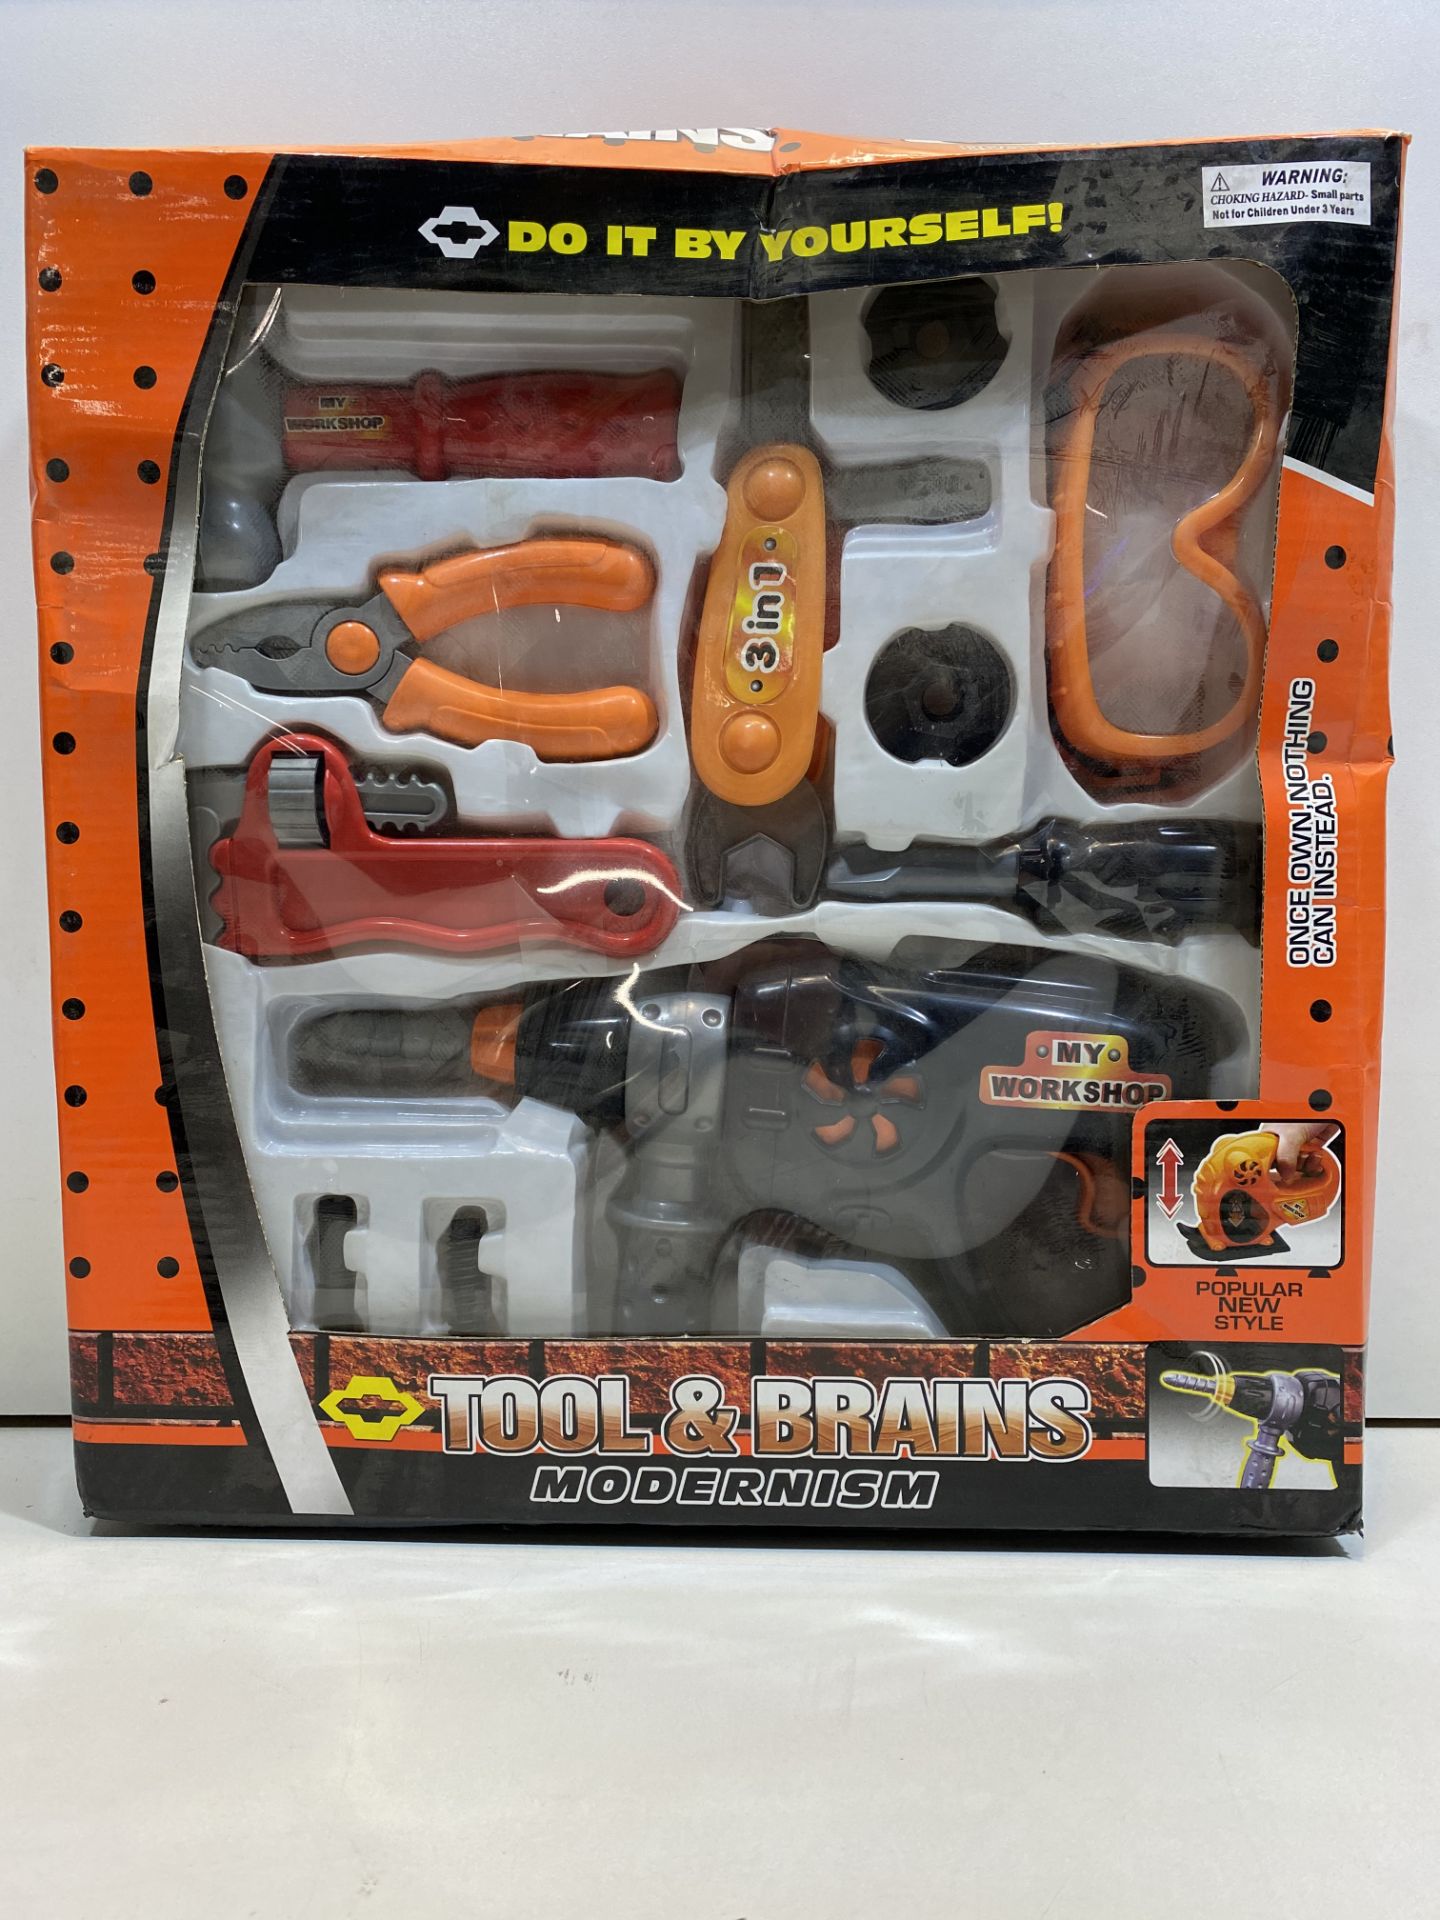 1 x Children's tool set 12 pieces with drill, protective goggles and much more